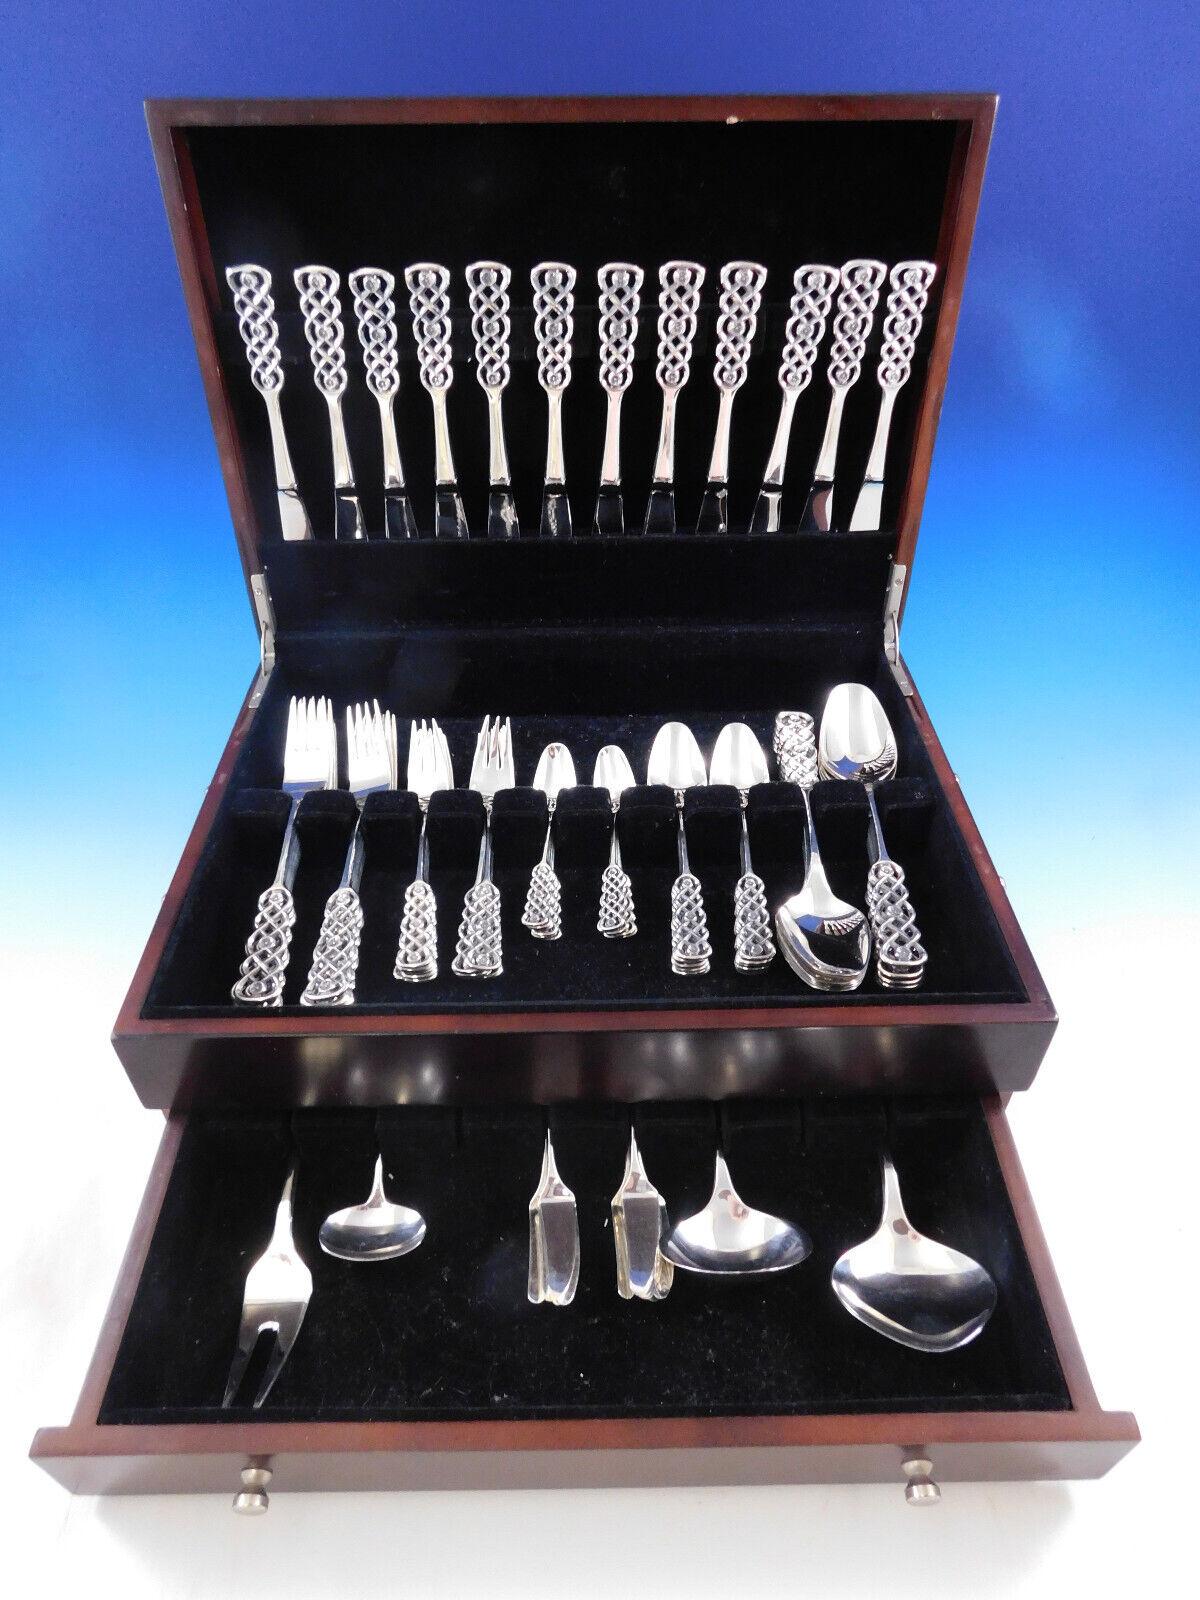 Ringebu by David Andersen 

Scarce 830S silver Set for 12 in the unique open handle pattern Ringebu by David Andersen - 88 pieces. This is one of the most unique silver flatware designs that you will find - even the knife has the fabulous openwork